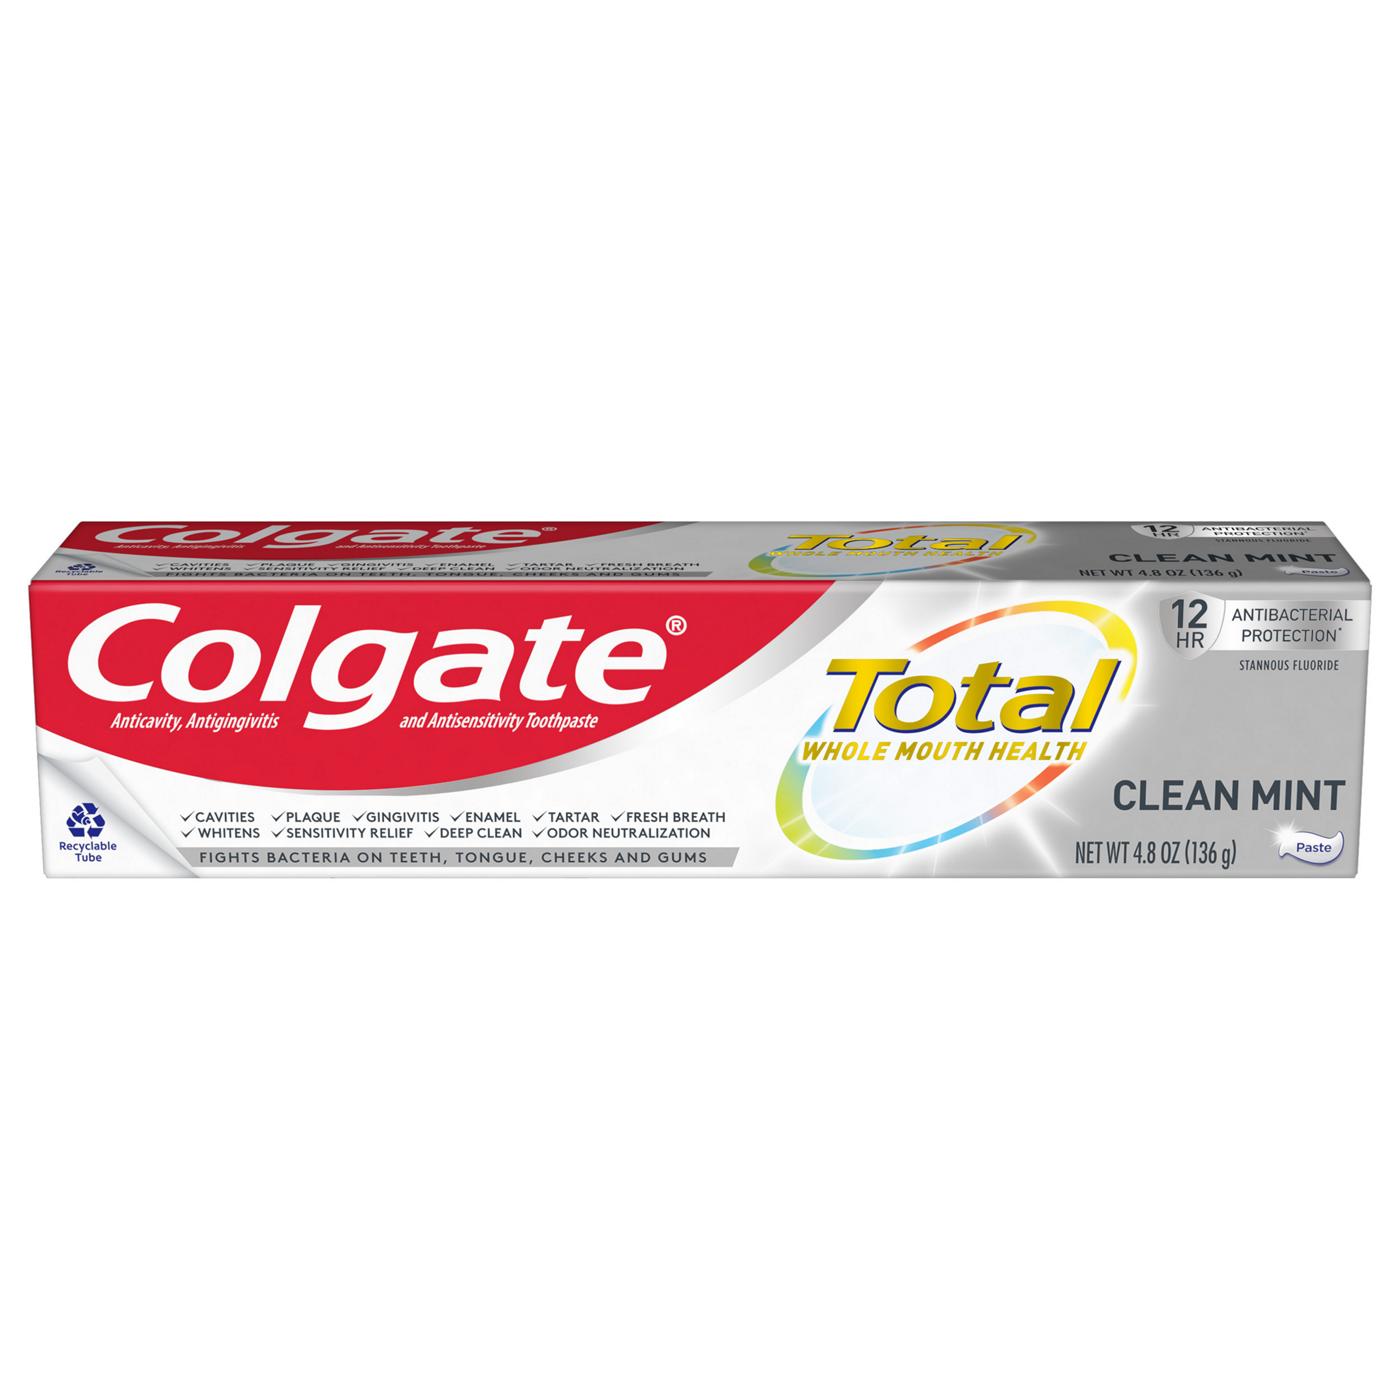 Colgate Total Toothpaste - Clean Mint; image 1 of 13